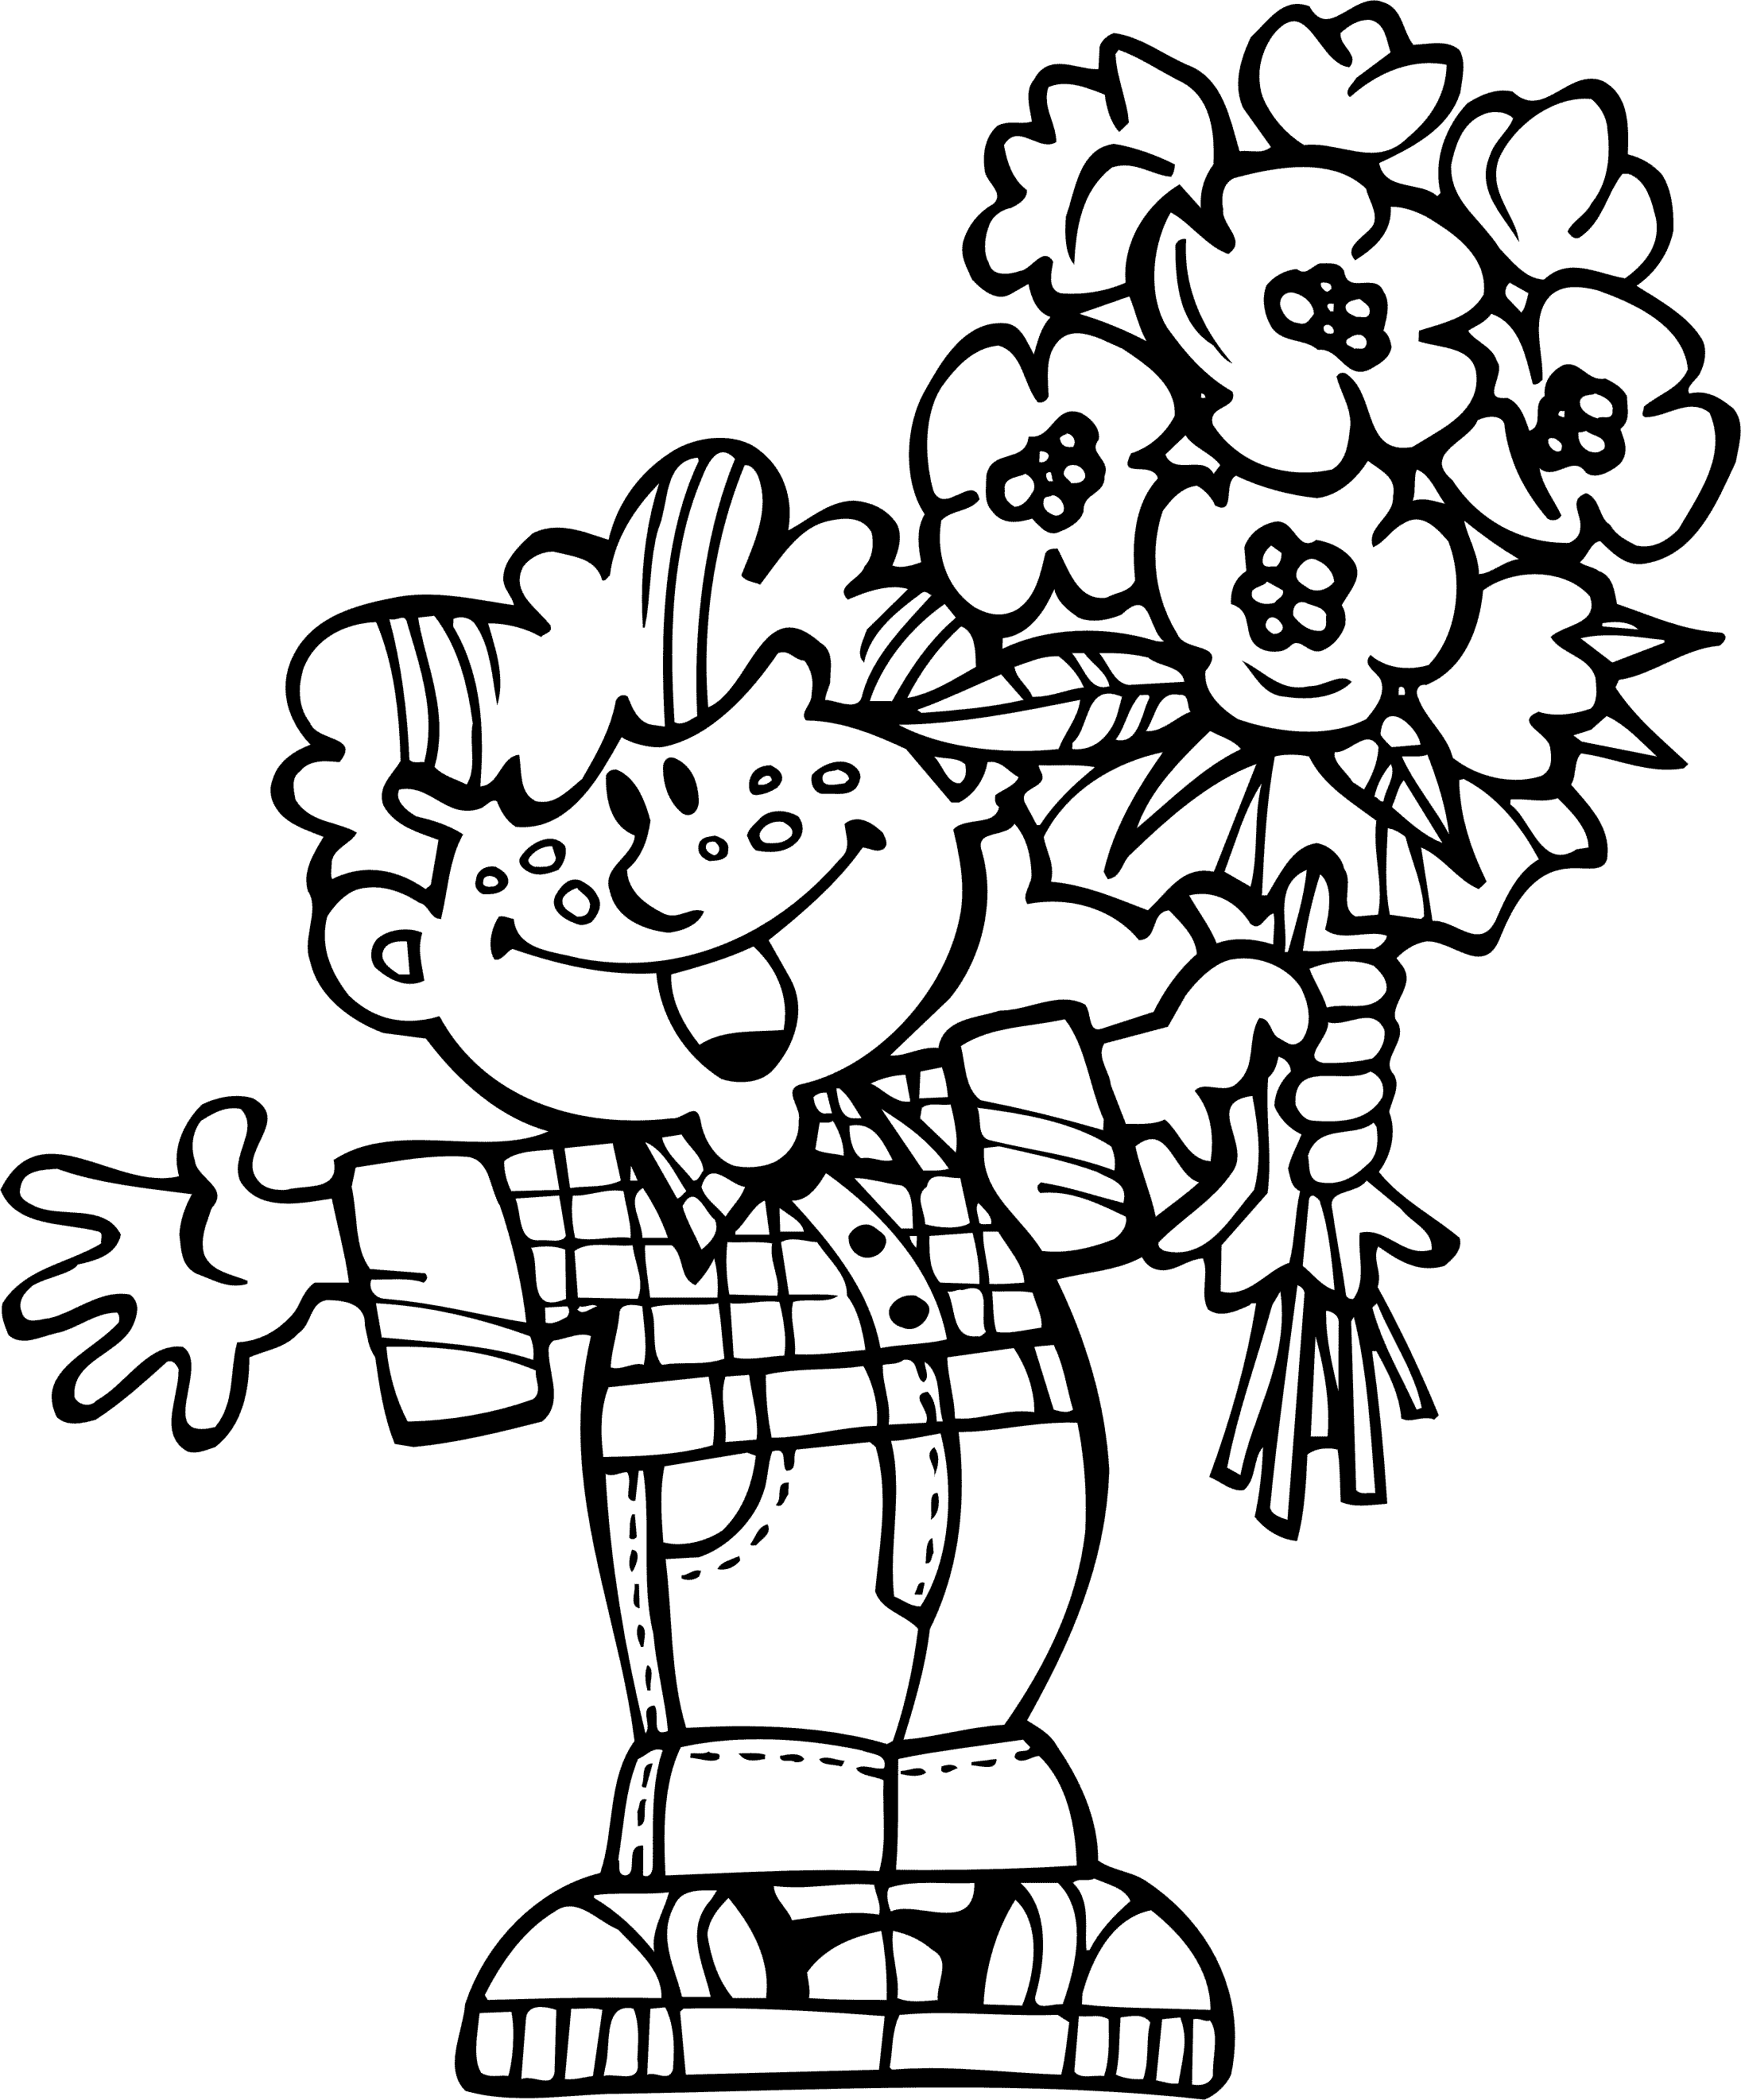 Bouquet Of Flowers Coloring Pages for childrens printable ...